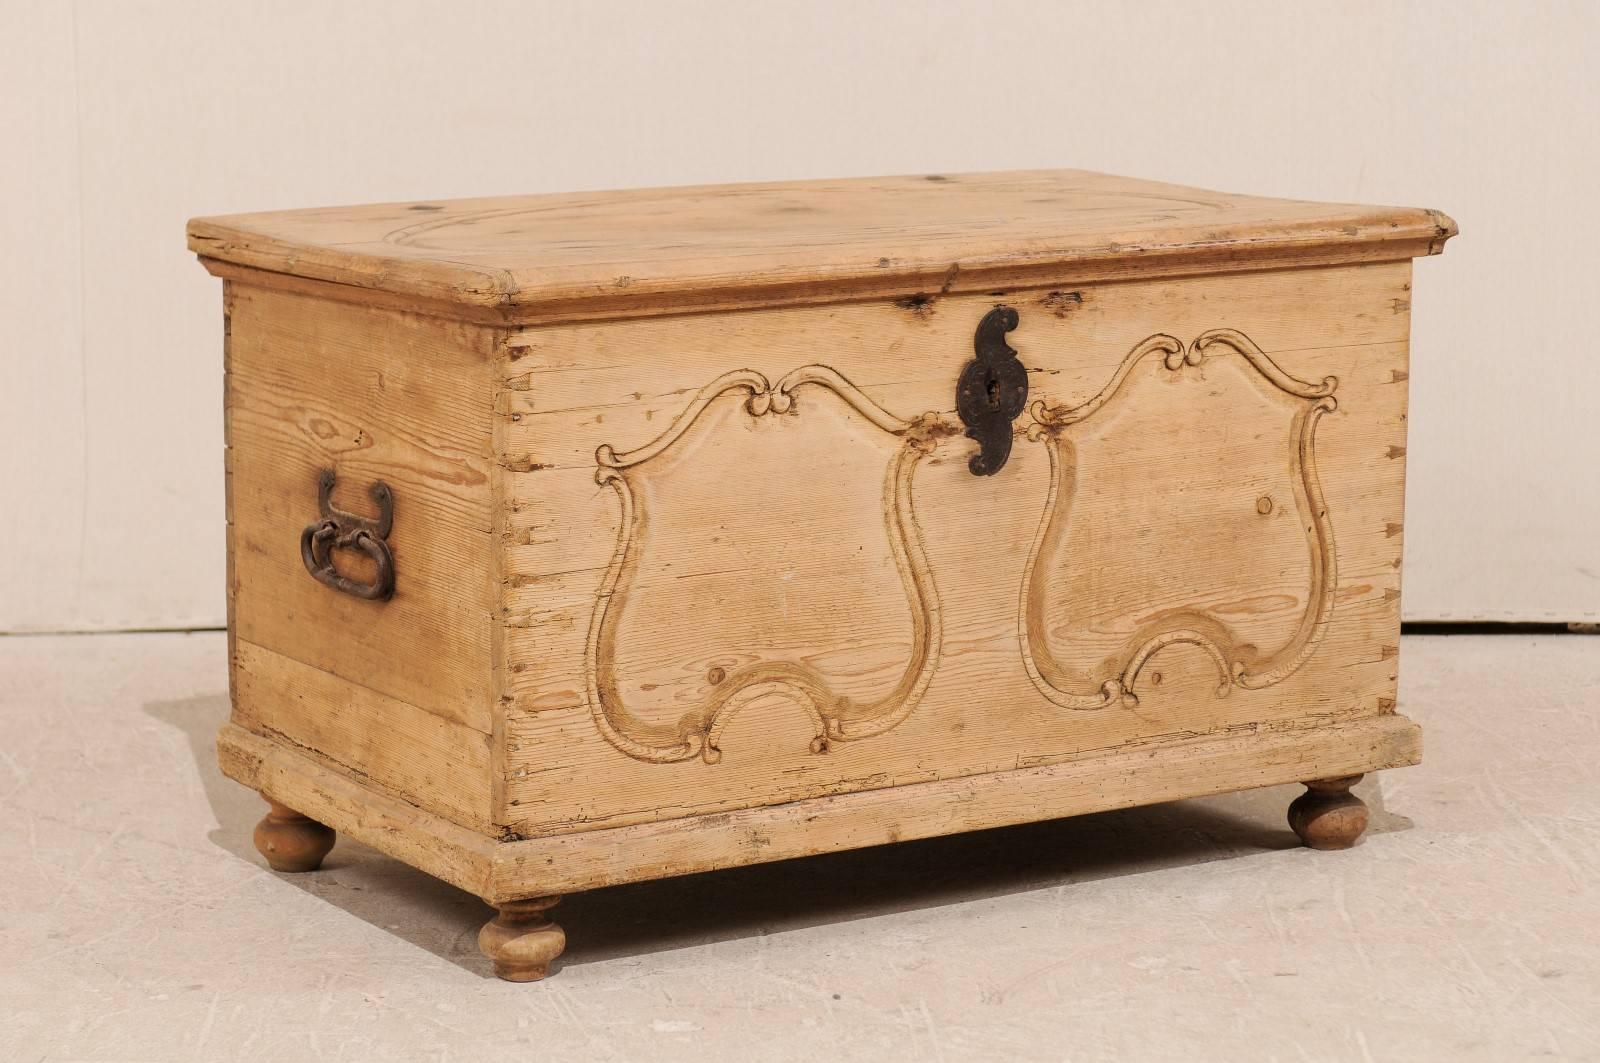 A Swedish 19th century wood coffer. This Swedish trunk from the 19th century features carved pine wood featuring an oval design at its top and two carved patterns on the front, reminiscent of a pair of shields. This pine chest has a natural wood